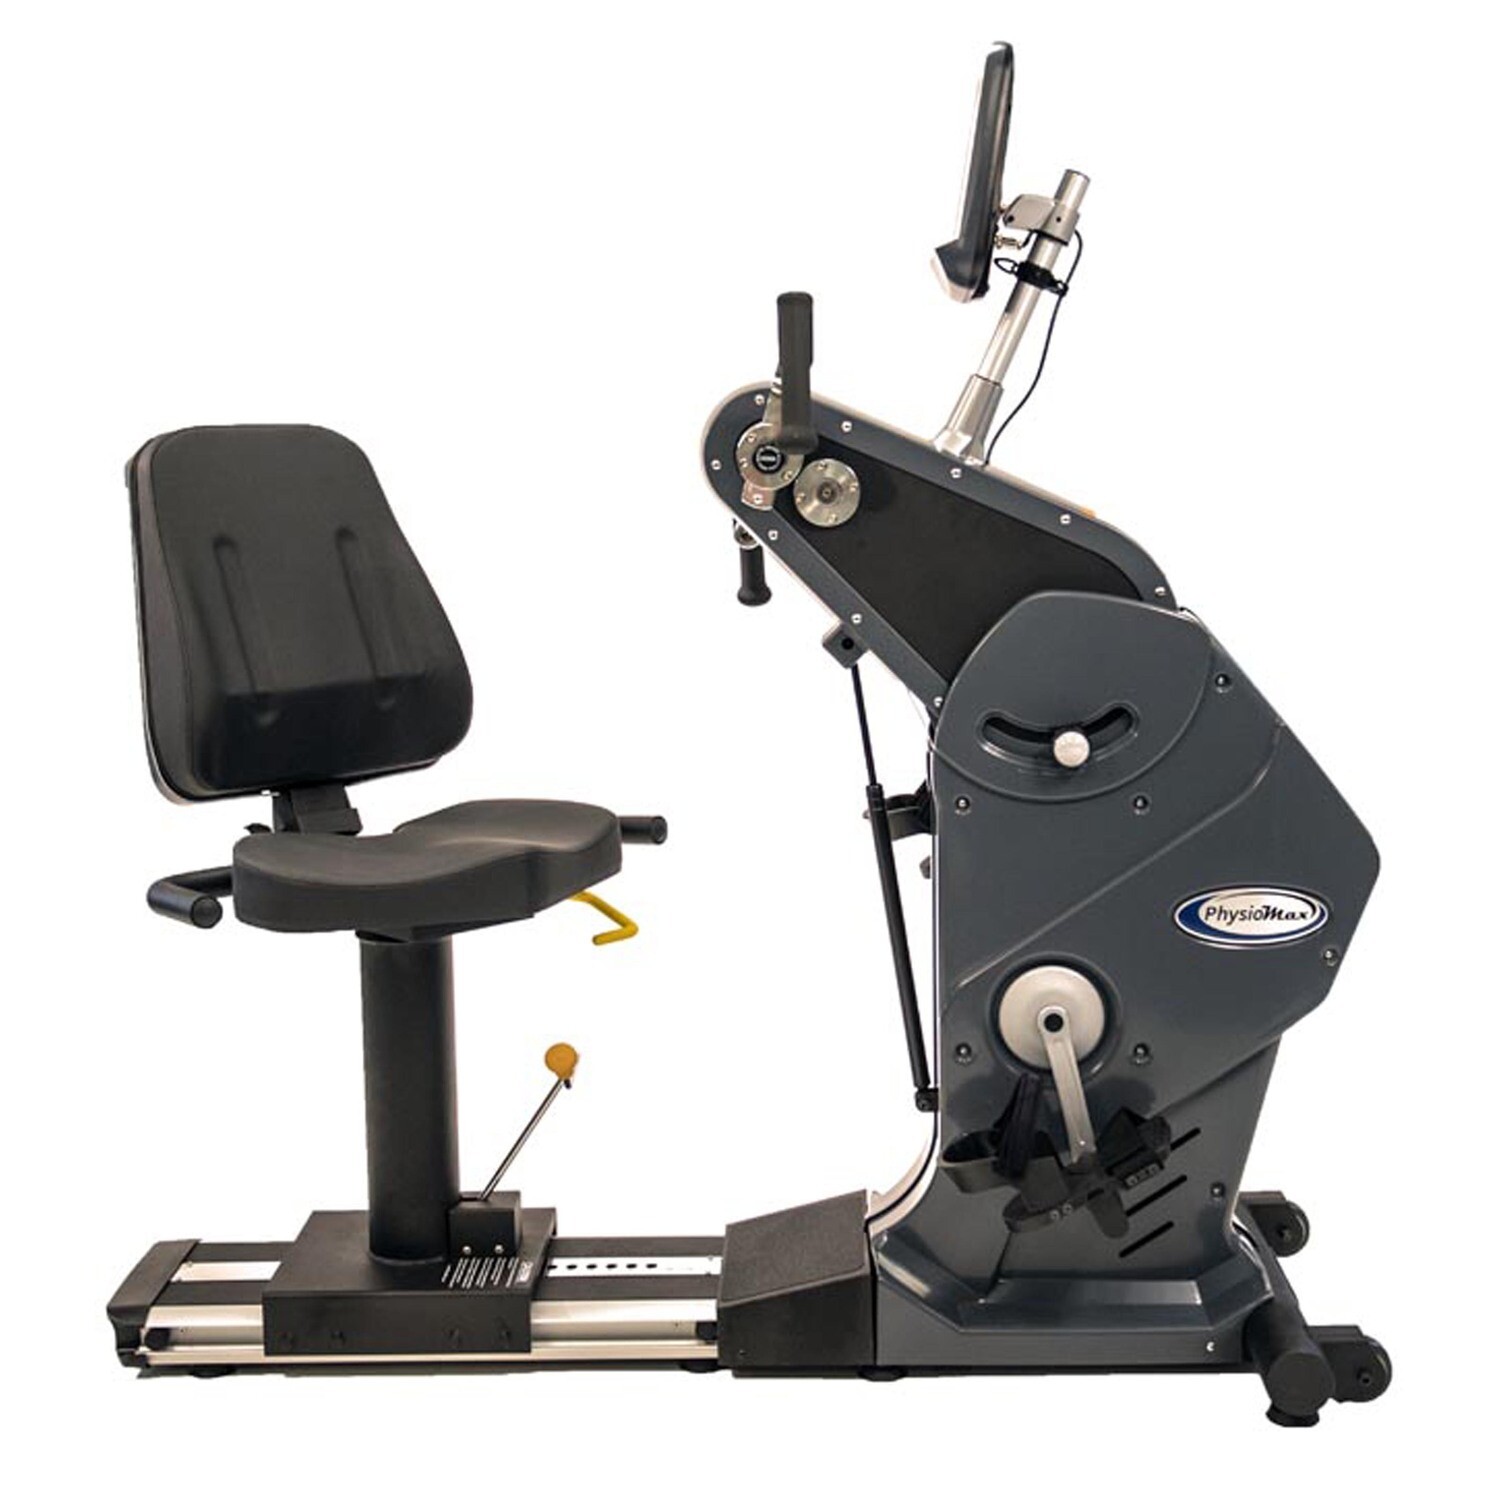 PhysioMax Total Body Trainer